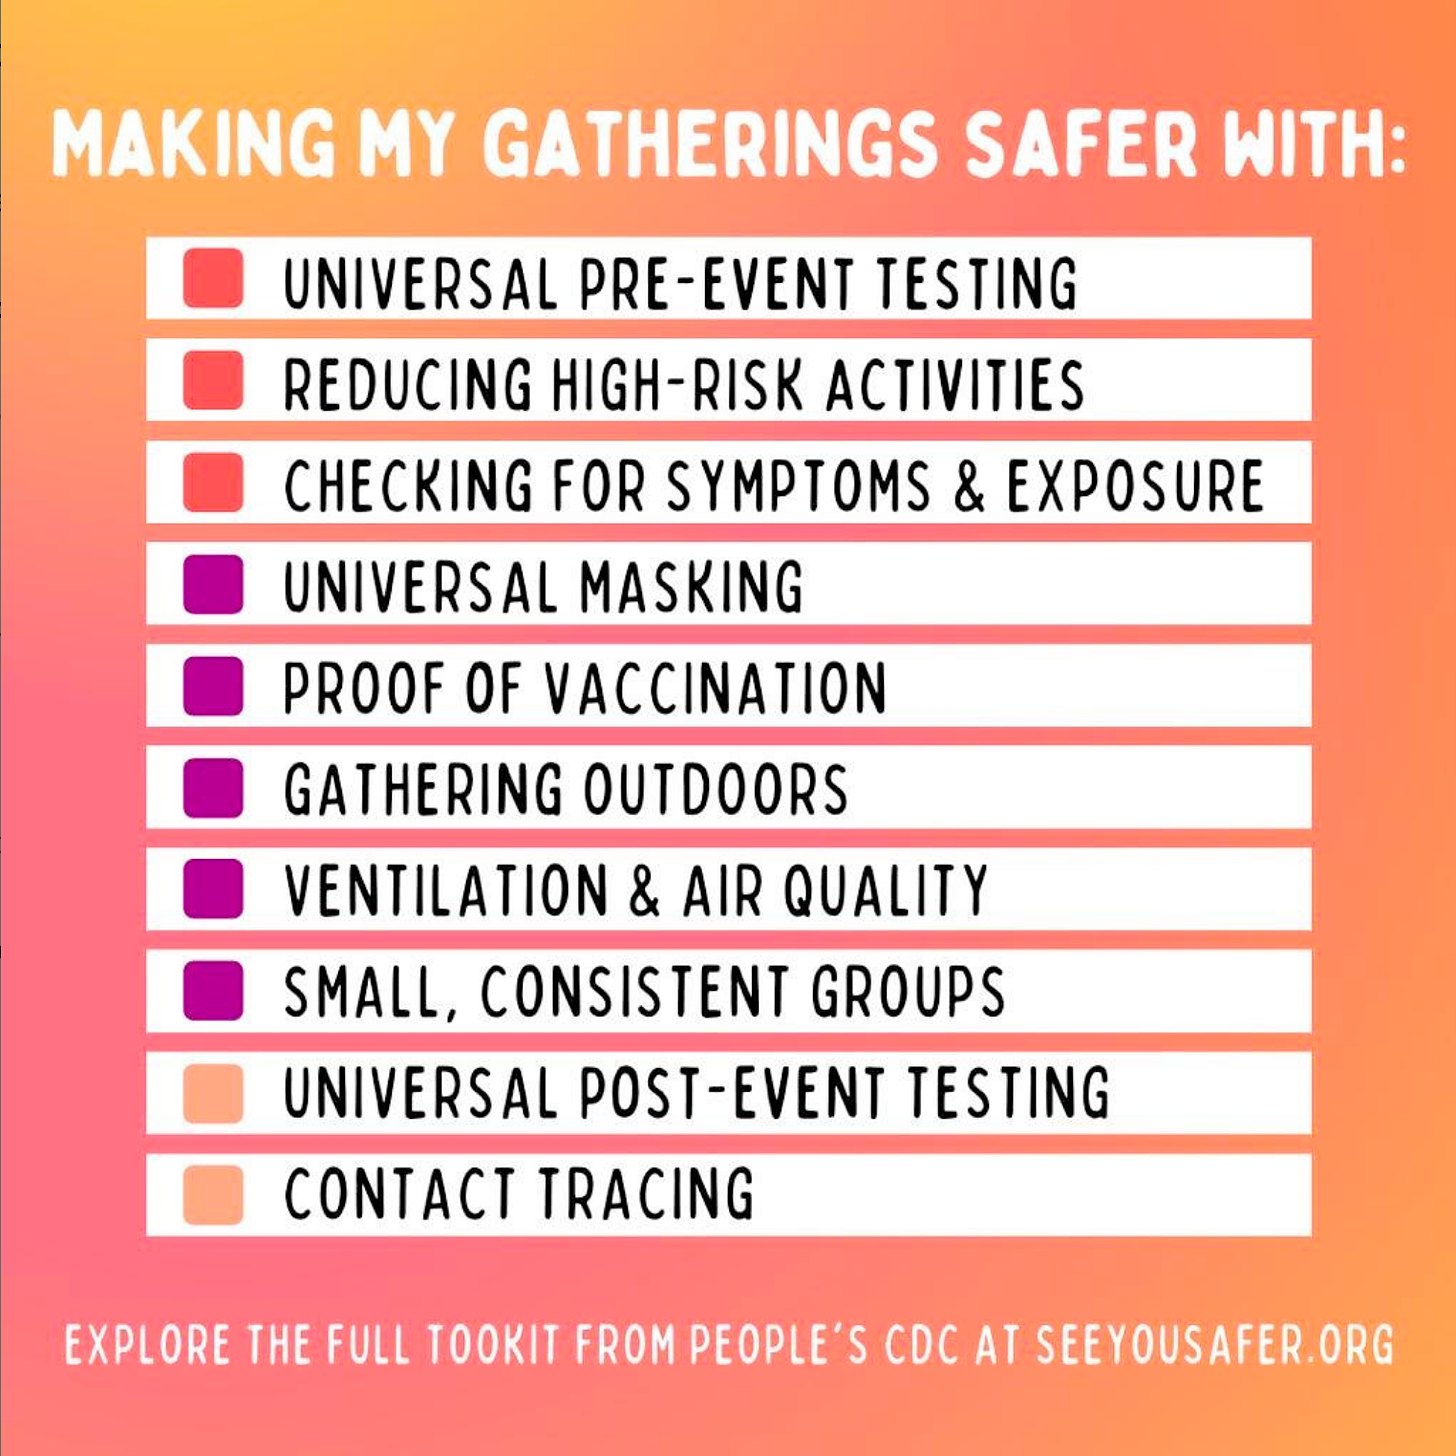  “Making my gatherings safer with:” followed by ten checklist items in white rectangles and empty checkboxes on the left of each item. The checklist reads “Universal pre-event testing. Reduce high-risk activities. Check for symptoms and exposure. Universal masking. Proof of vaccination. Gather outdoors. Ventilation and air quality. Small, consistent groups. Universal post-event testing. Contract tracing. Explore the full toolkit from People’s CDC at SeeYouSafer.org